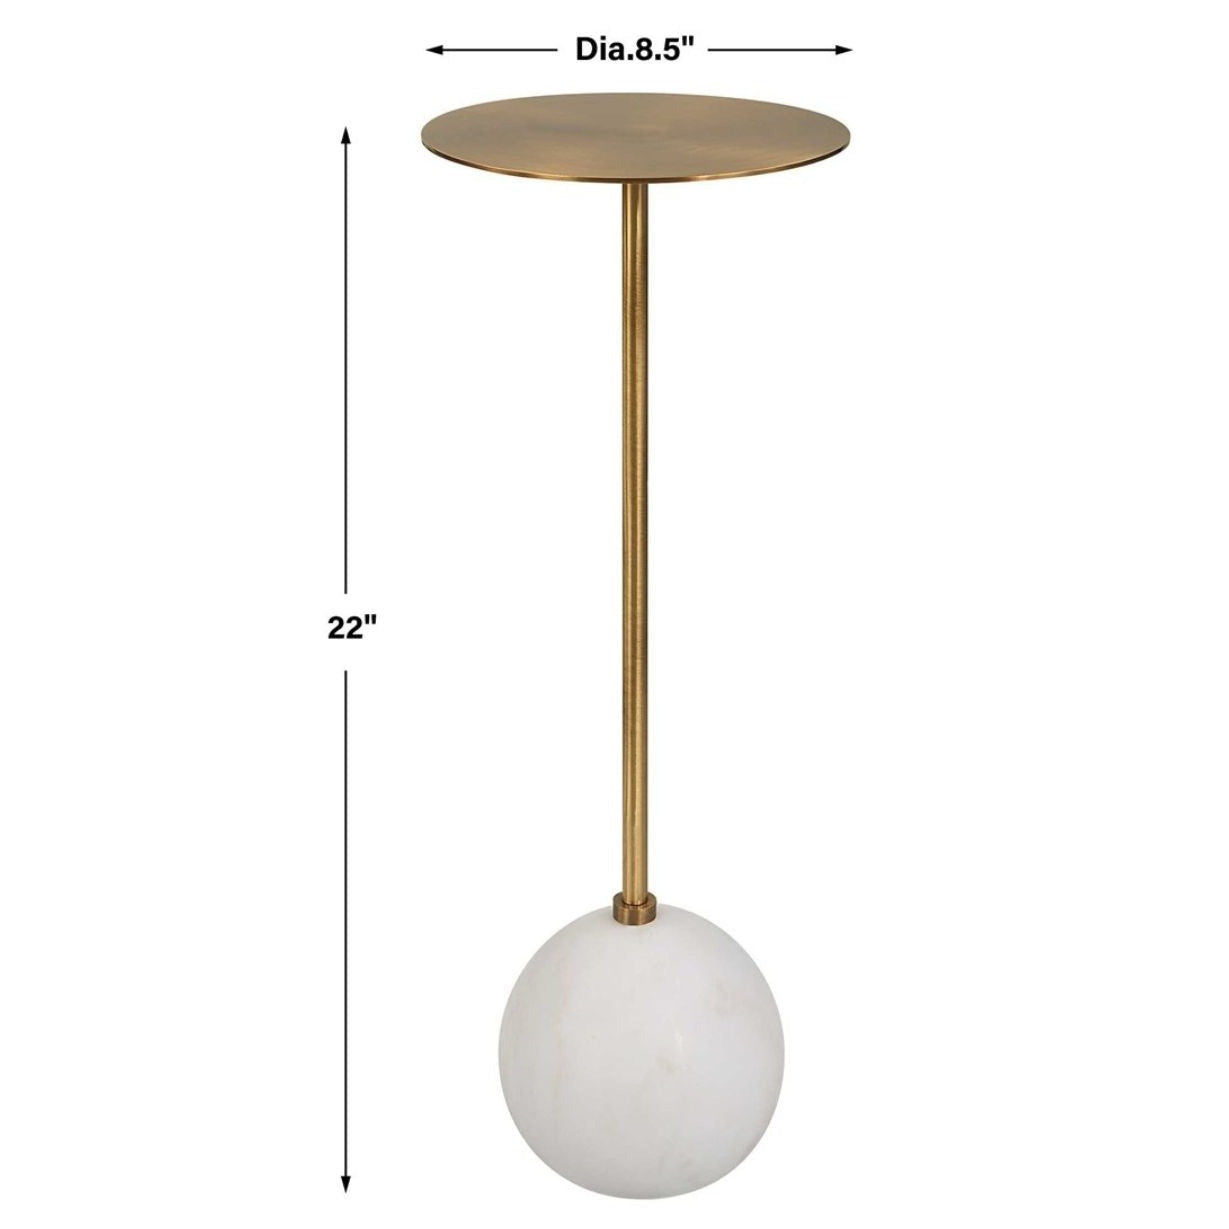 This photo shows table with dimensions of 8 1/2" diameter by 22" tall.